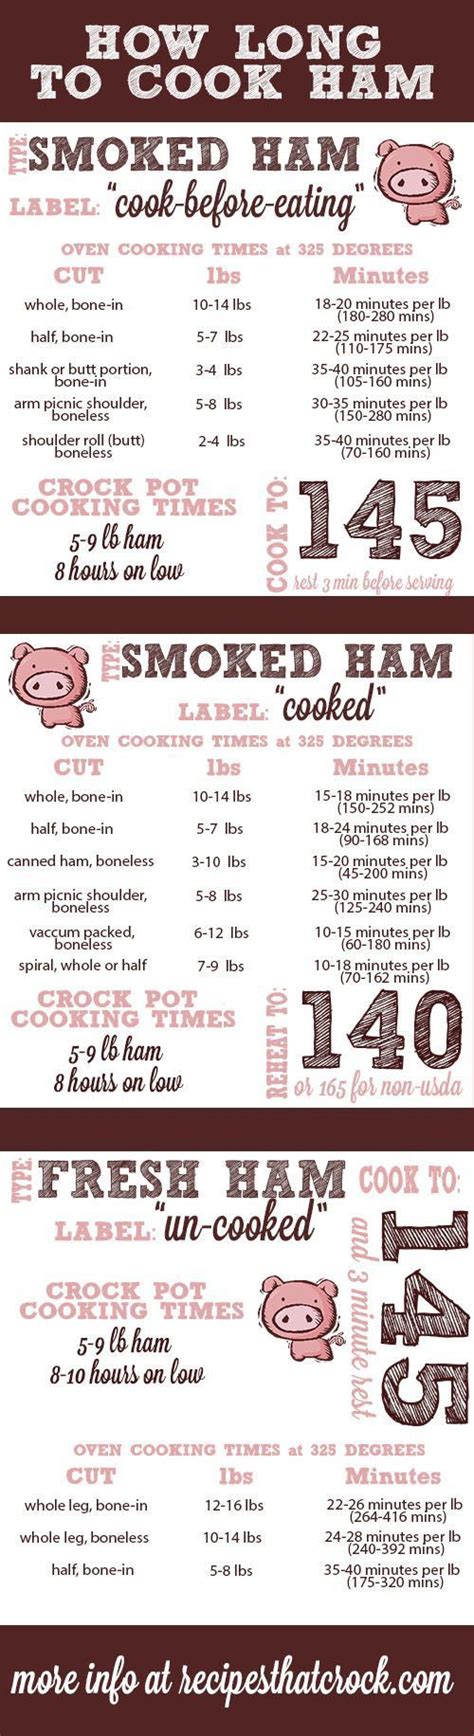 how long to cook ham infographic there are many factors that determine cooking times for ham